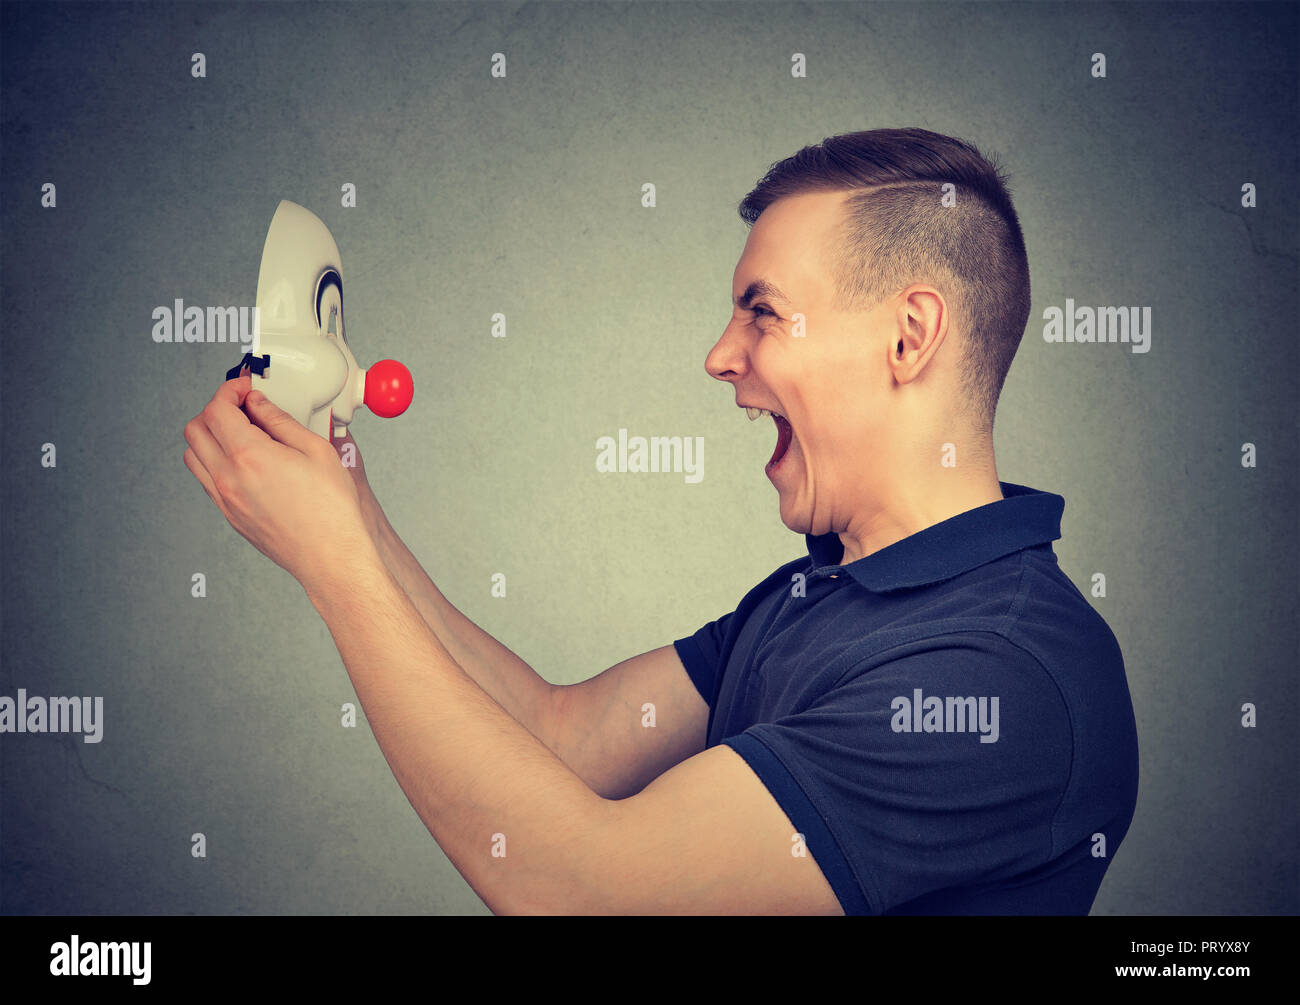 Side view of casual man yelling and looking at clown mask standing on gray background Stock Photo